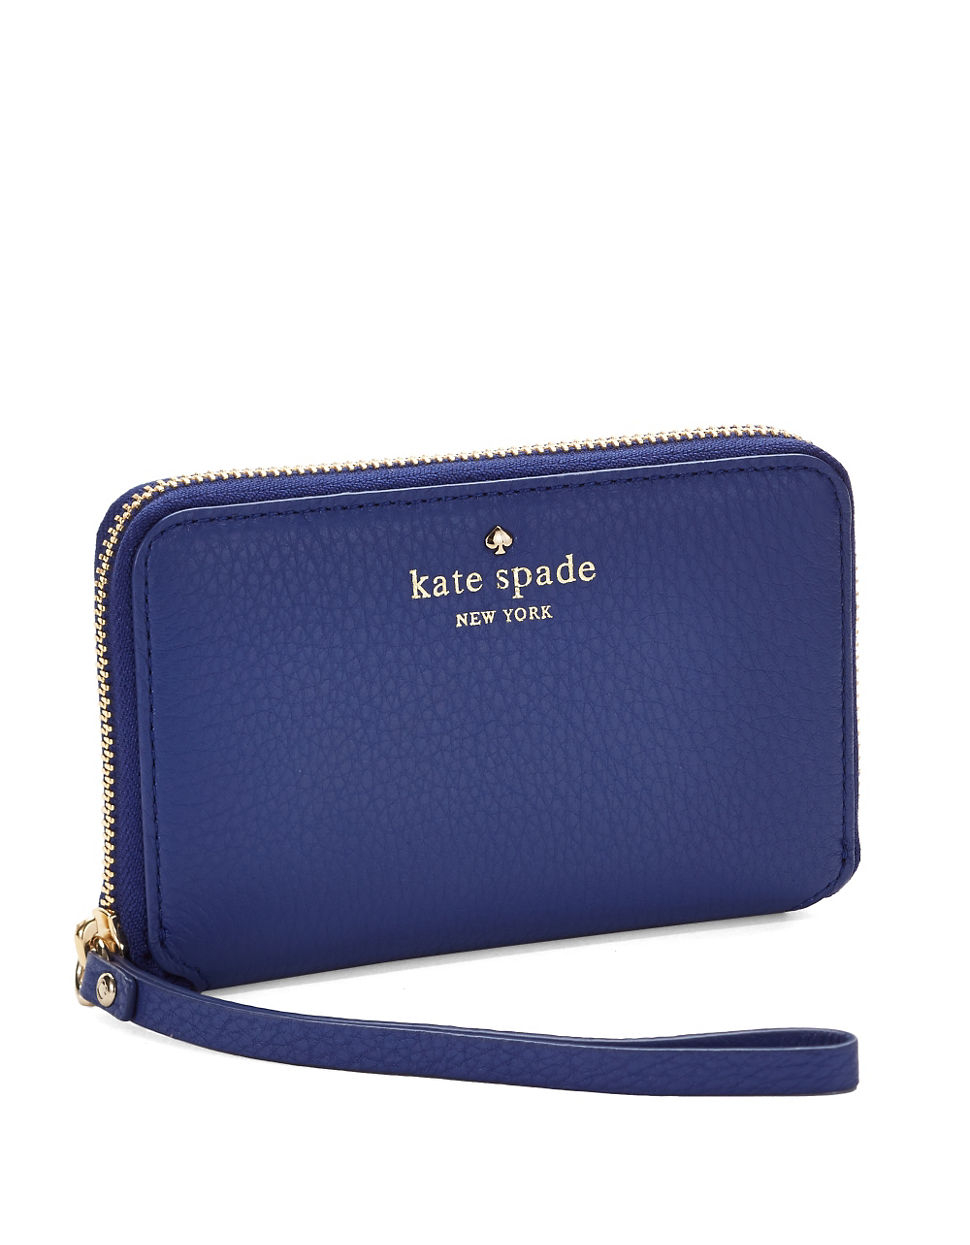 Lyst - Kate Spade New York Cobble Hill Louie Leather Wristlet in Blue